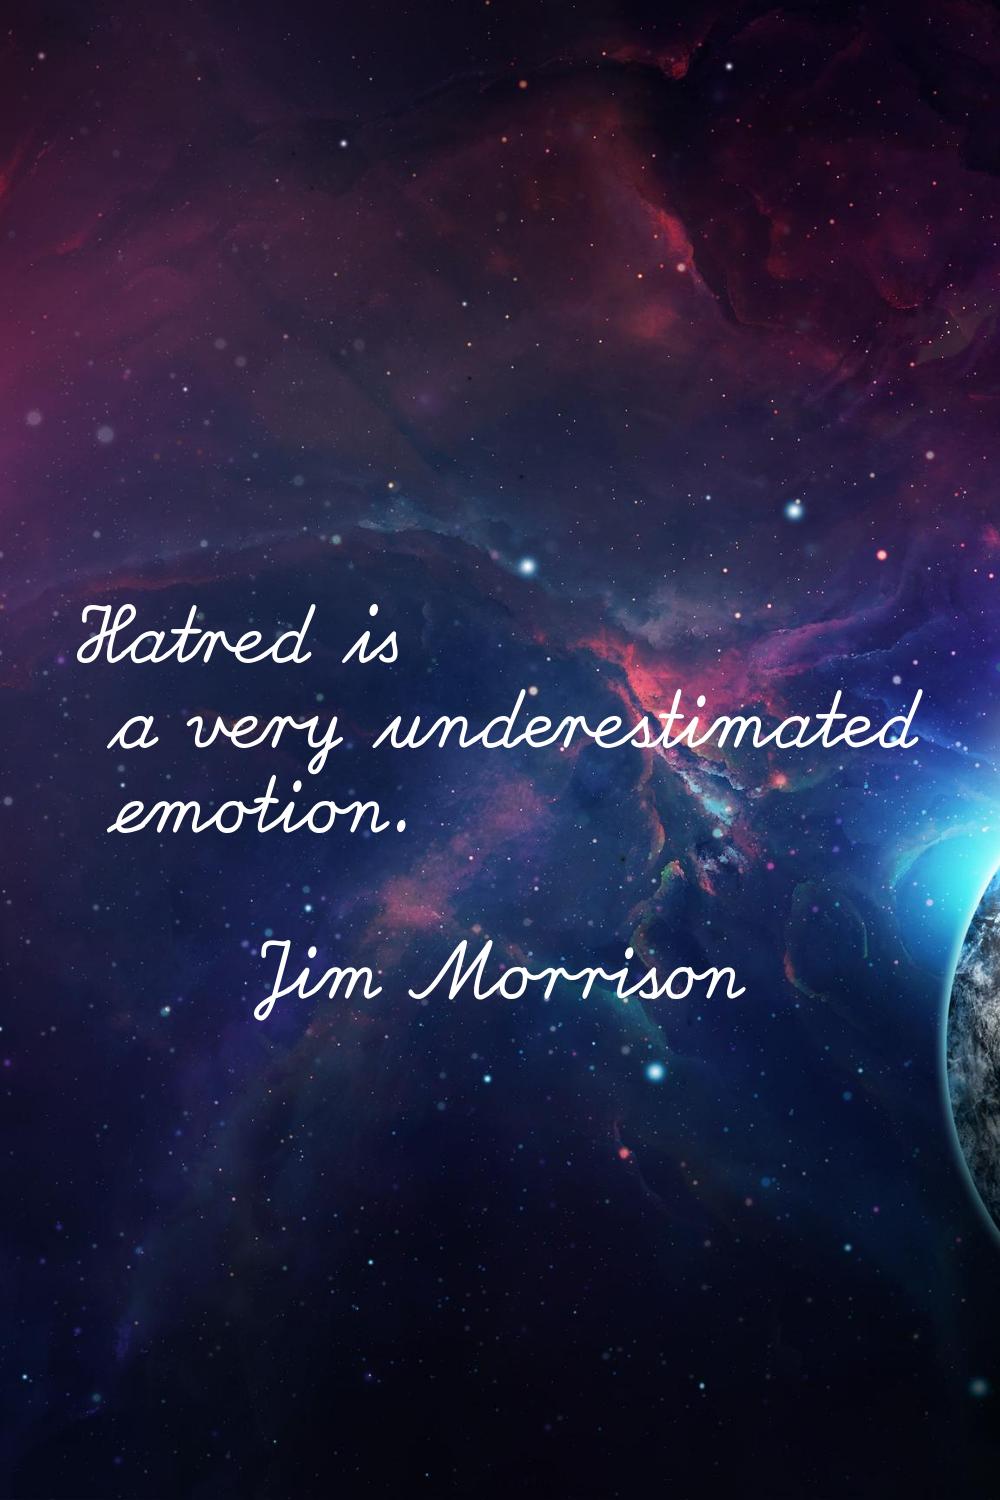 Hatred is a very underestimated emotion.